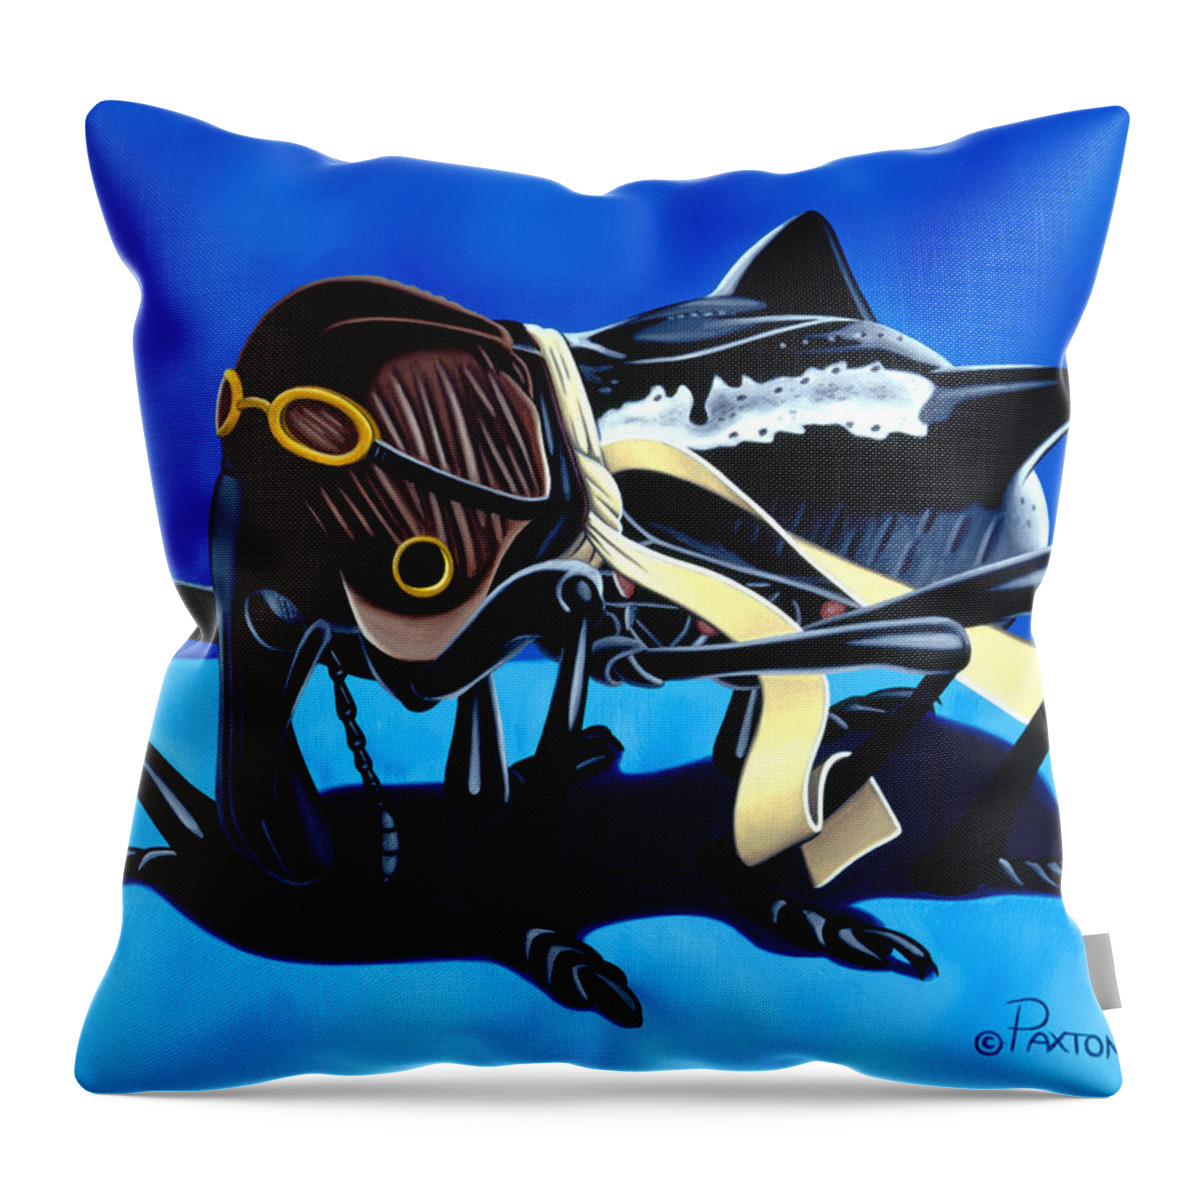  Throw Pillow featuring the painting The Veteran by Paxton Mobley